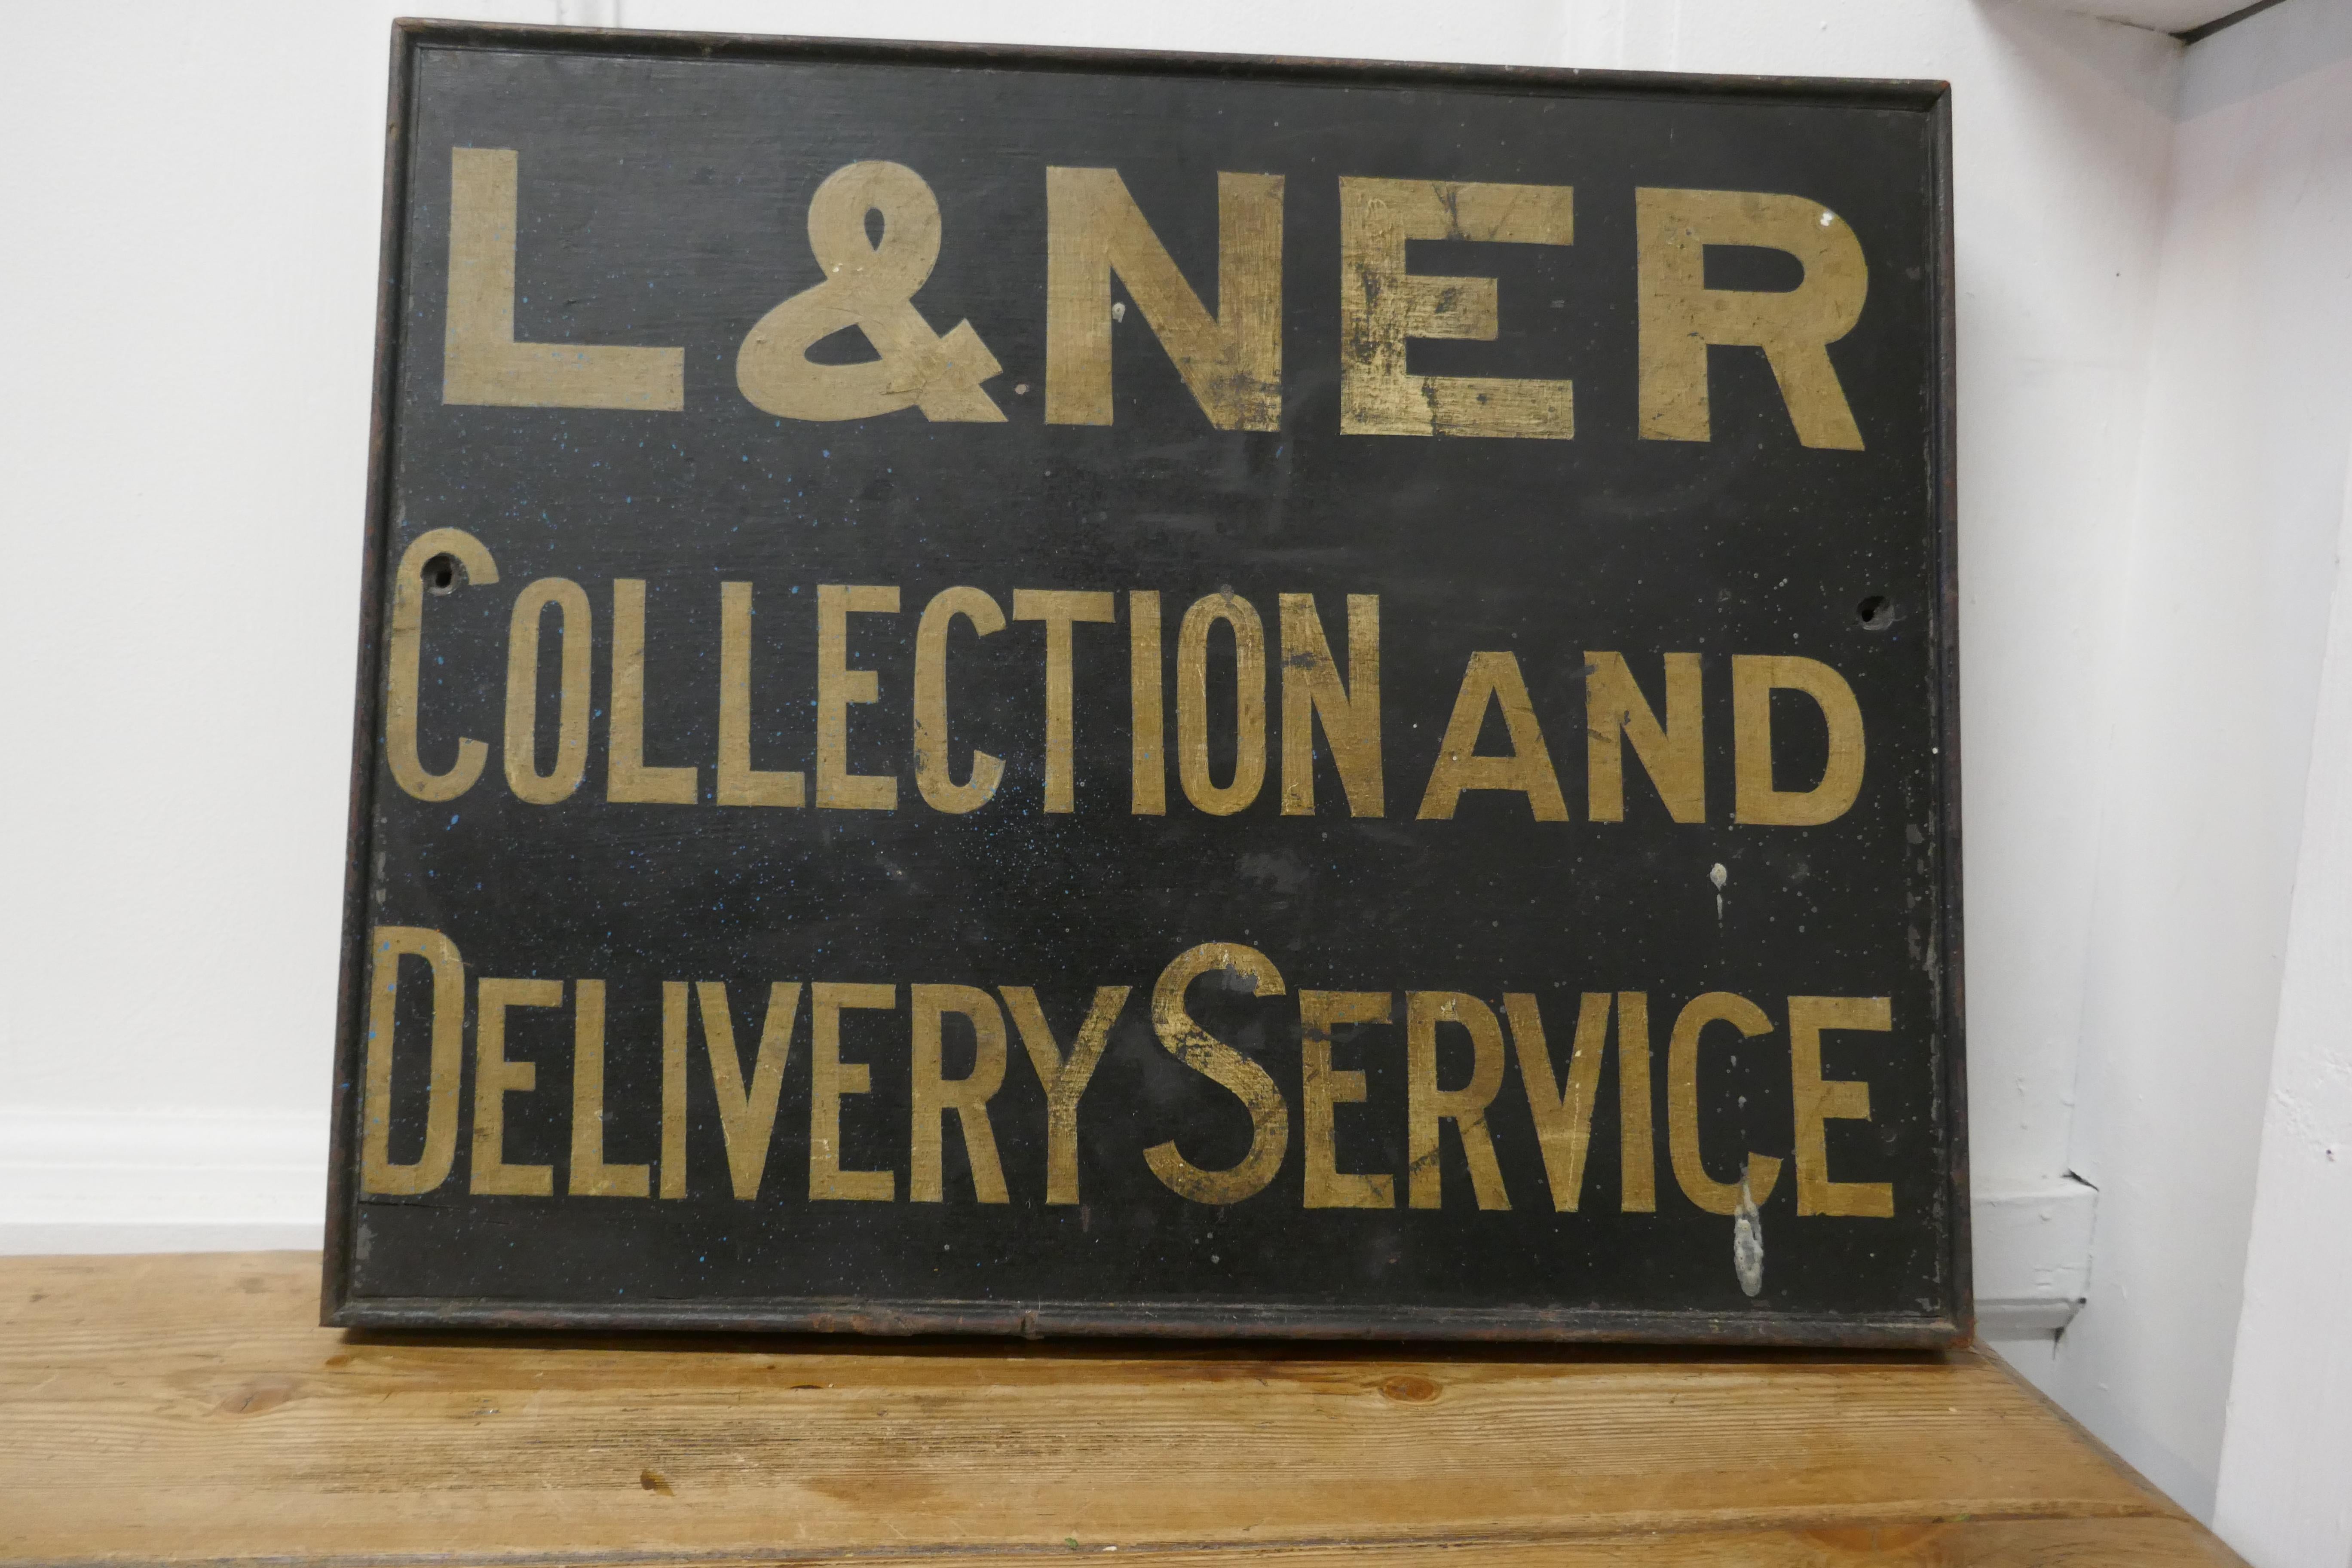 L & N E R Wooden Railway Sign

This great British Railway sign is a piece of History, dating from the 1930s the sign is painted on a framed wooden board. The sign reads “L & N E R COLLECTION AND DELIVERY SERVICE”
The sign is in good weathered